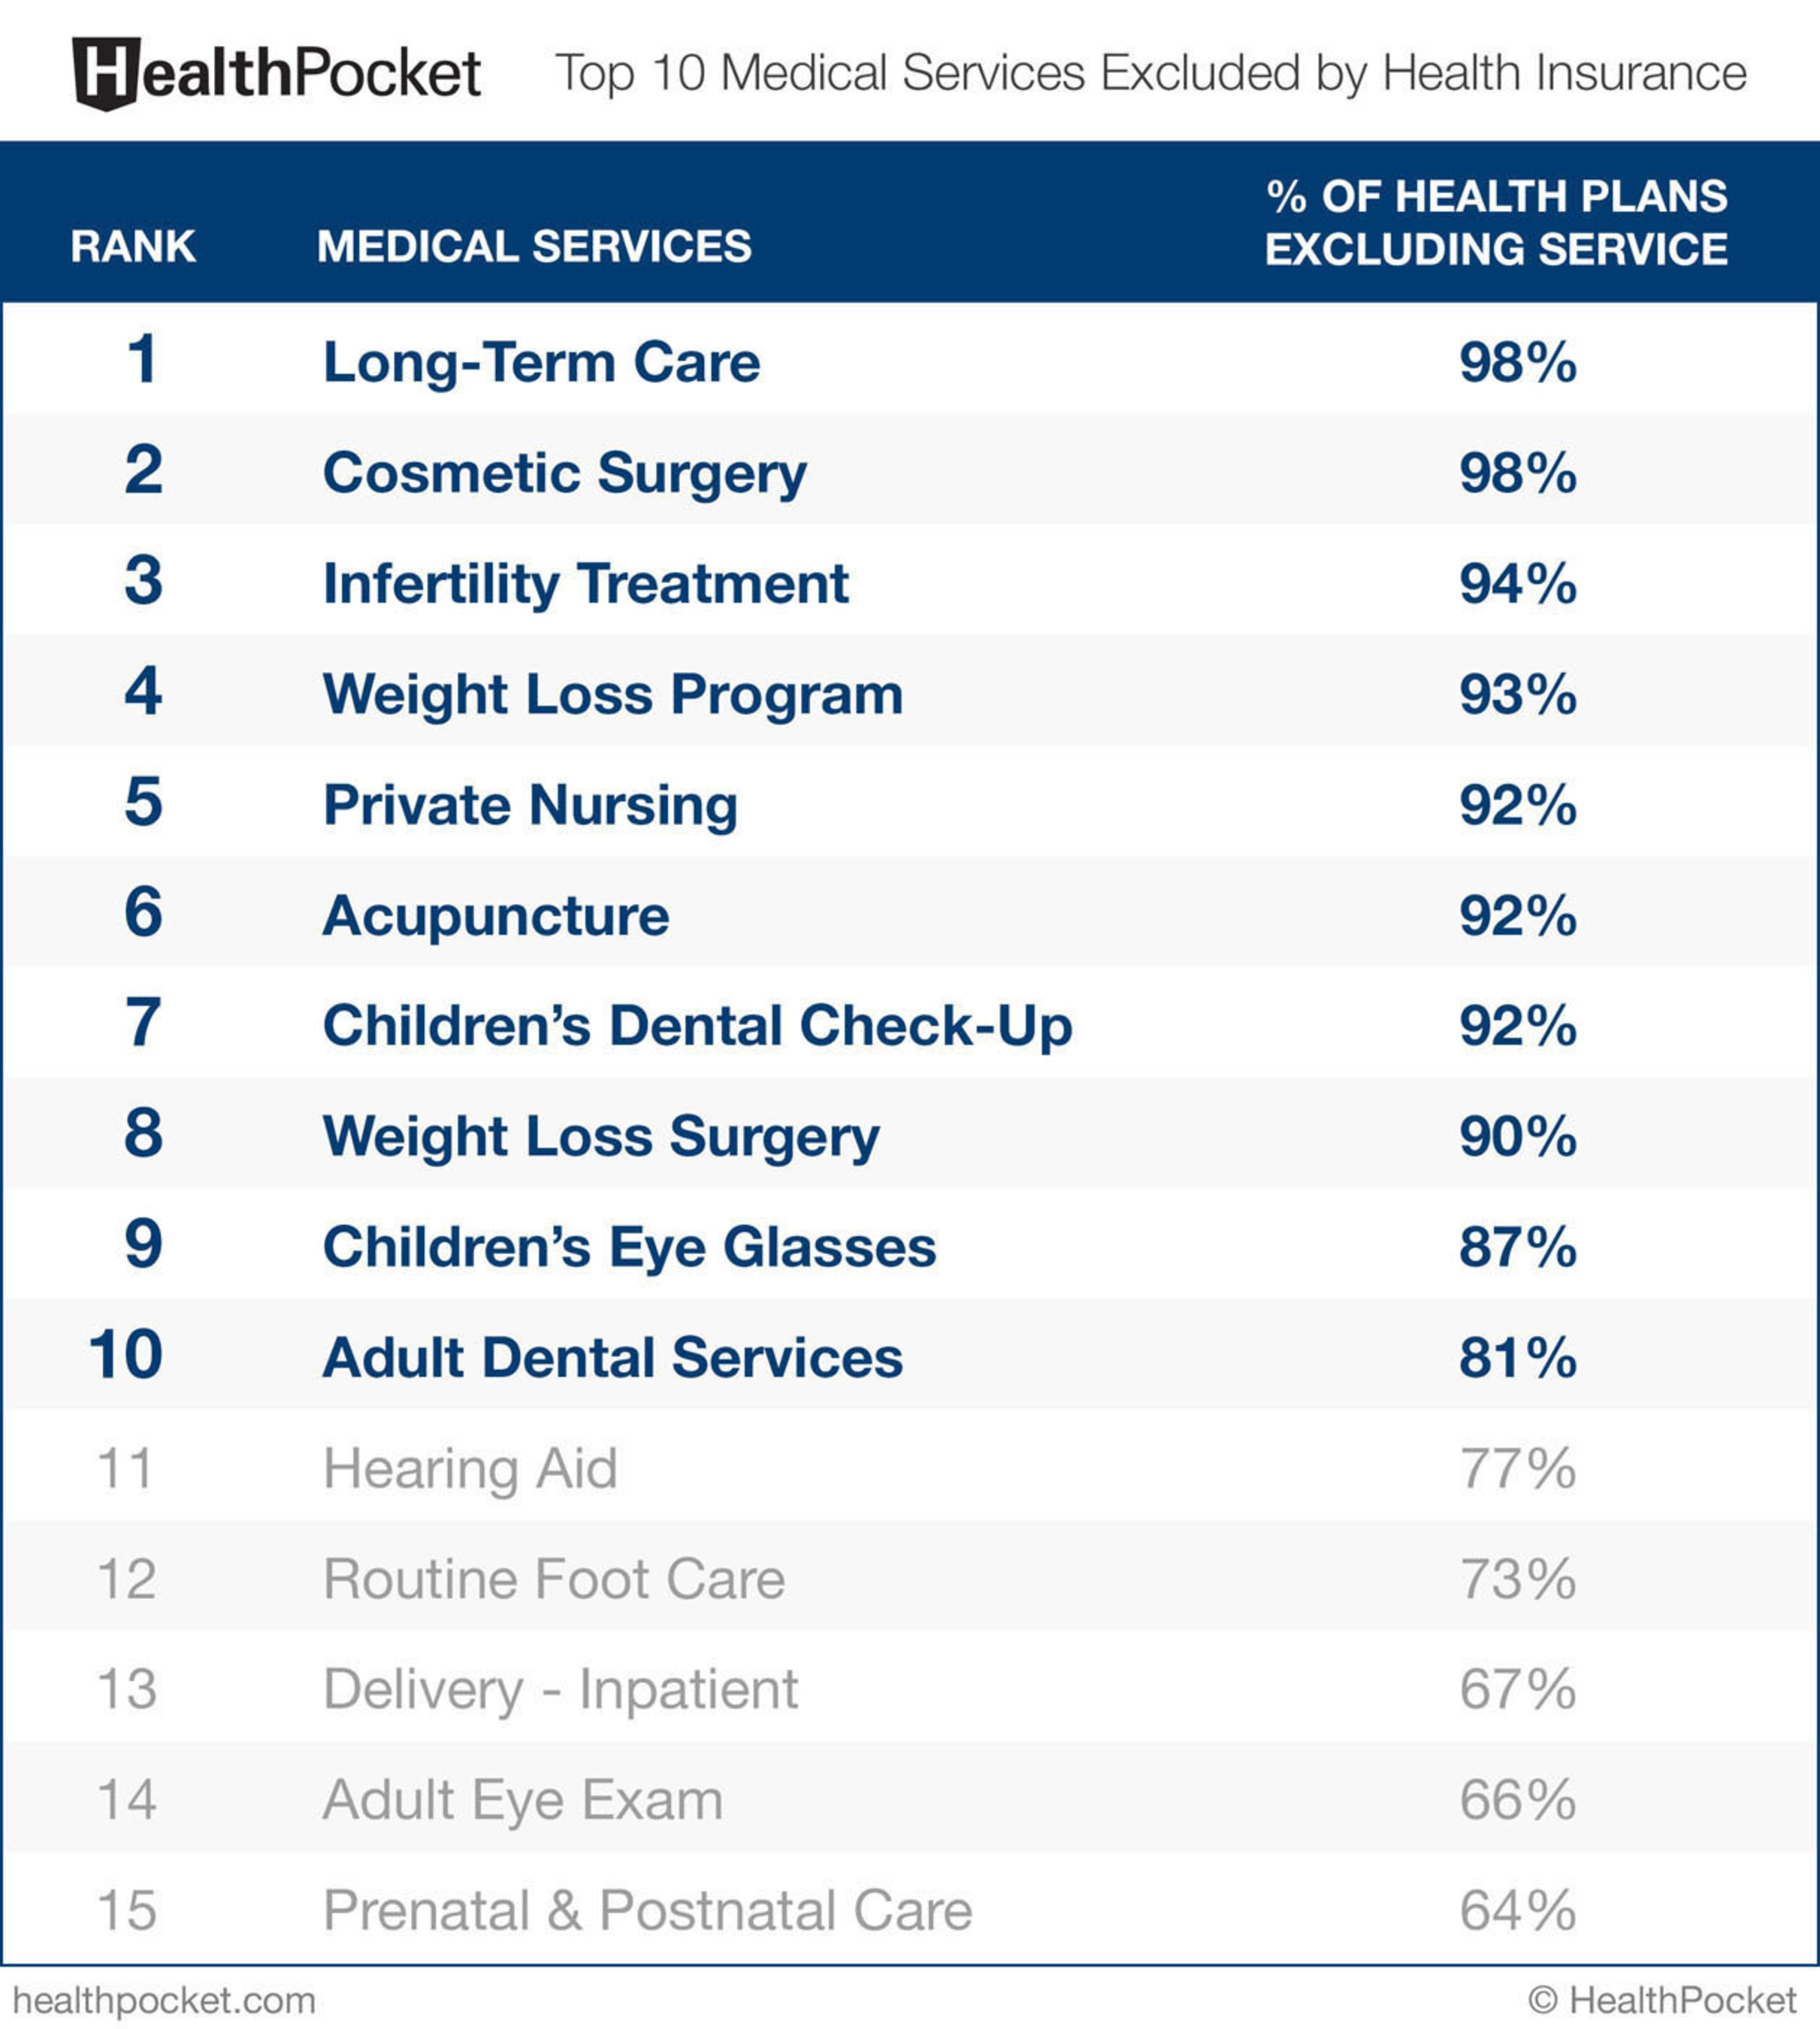 These medical services are most frequently not covered by health insurance providers, and can pack big costs to consumers. (PRNewsFoto/HealthPocket) (PRNewsFoto/HEALTHPOCKET)